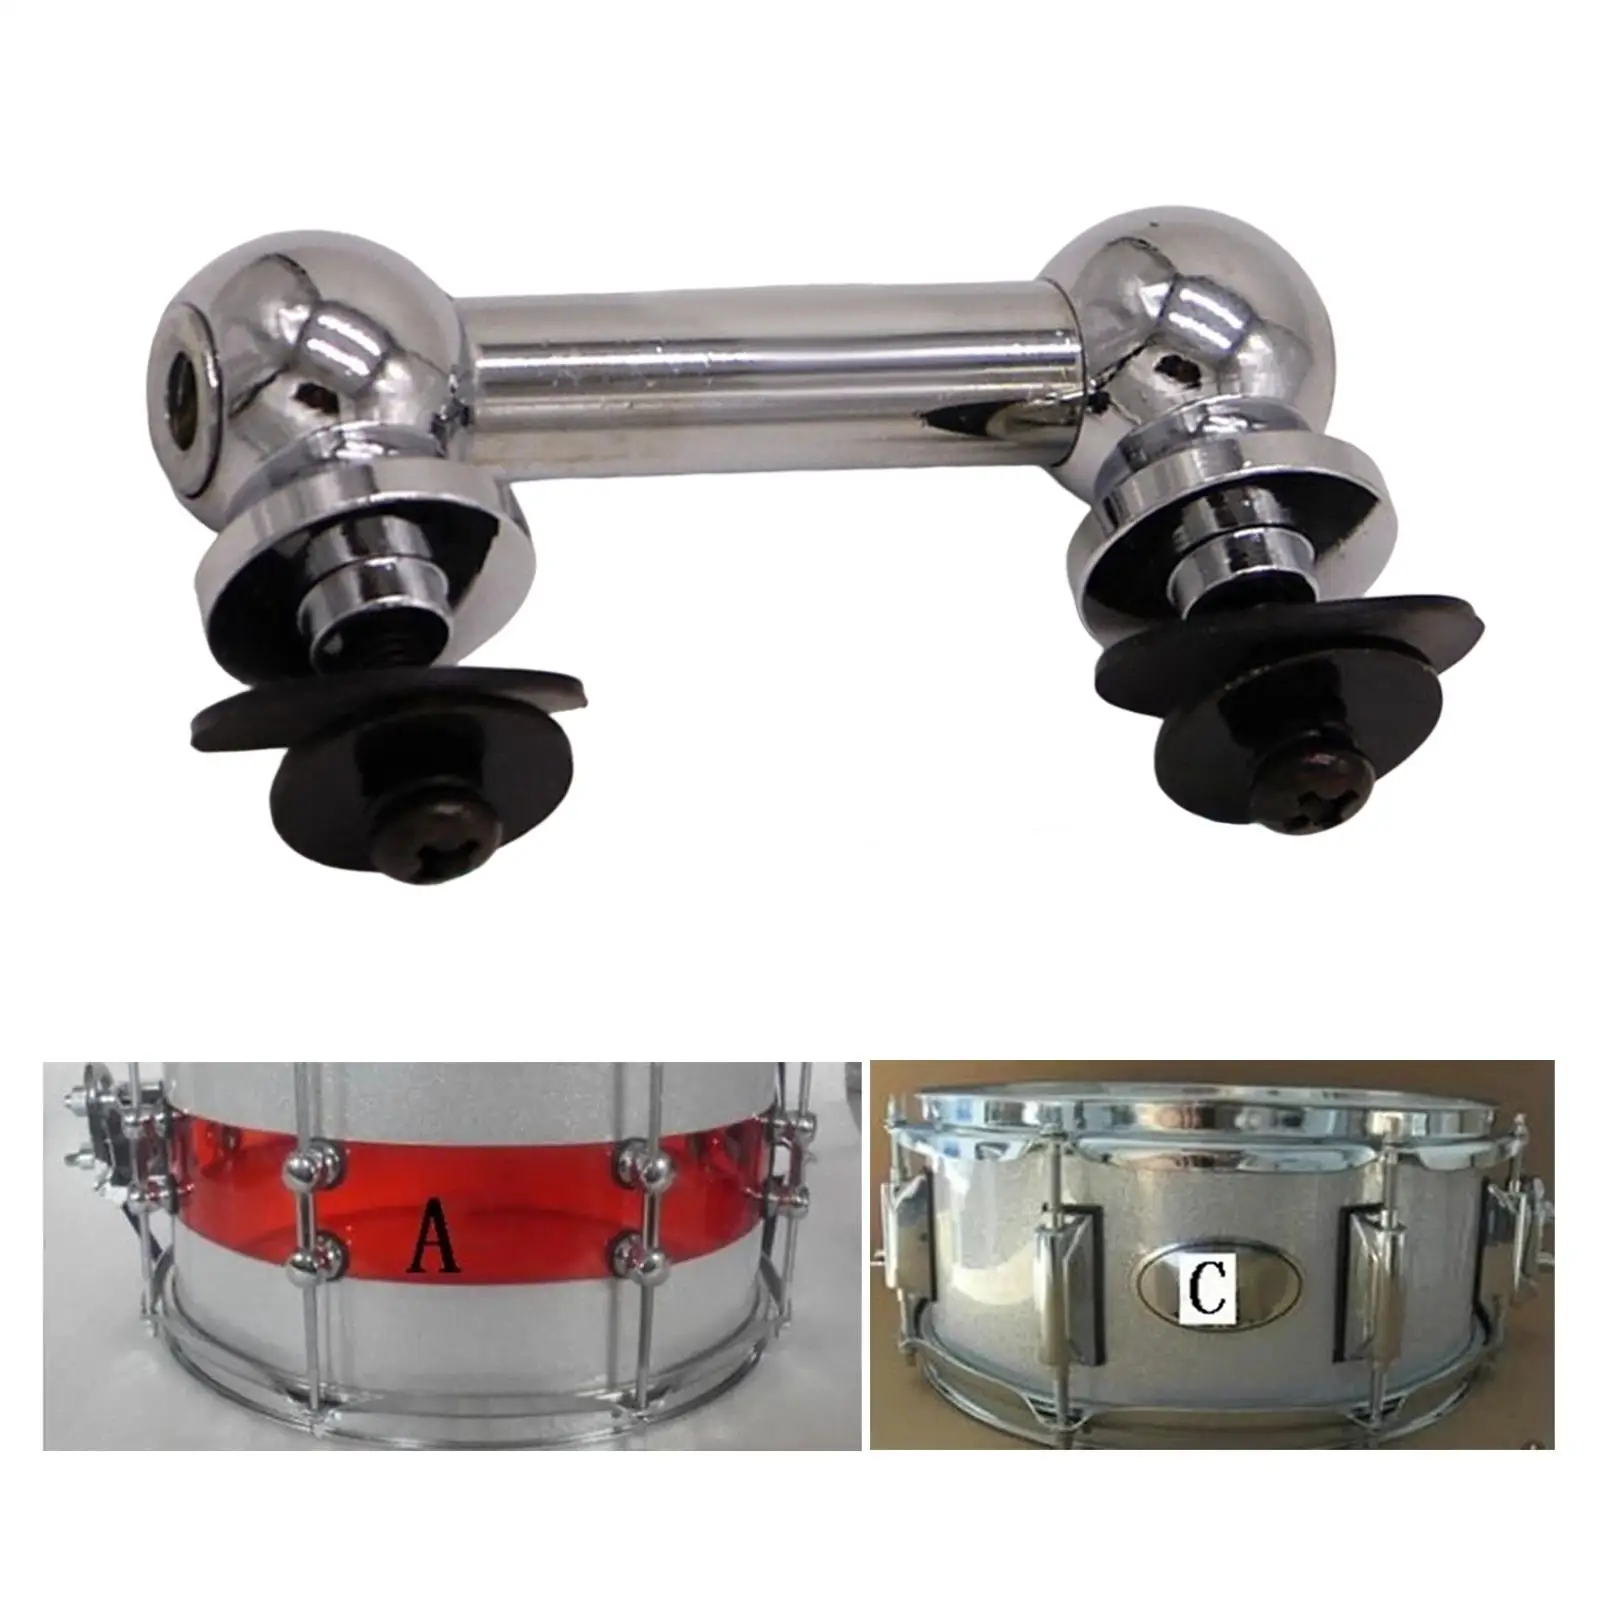 Aluminum Alloy Double End Drum Lugs, Two Side Drum Lug Snare